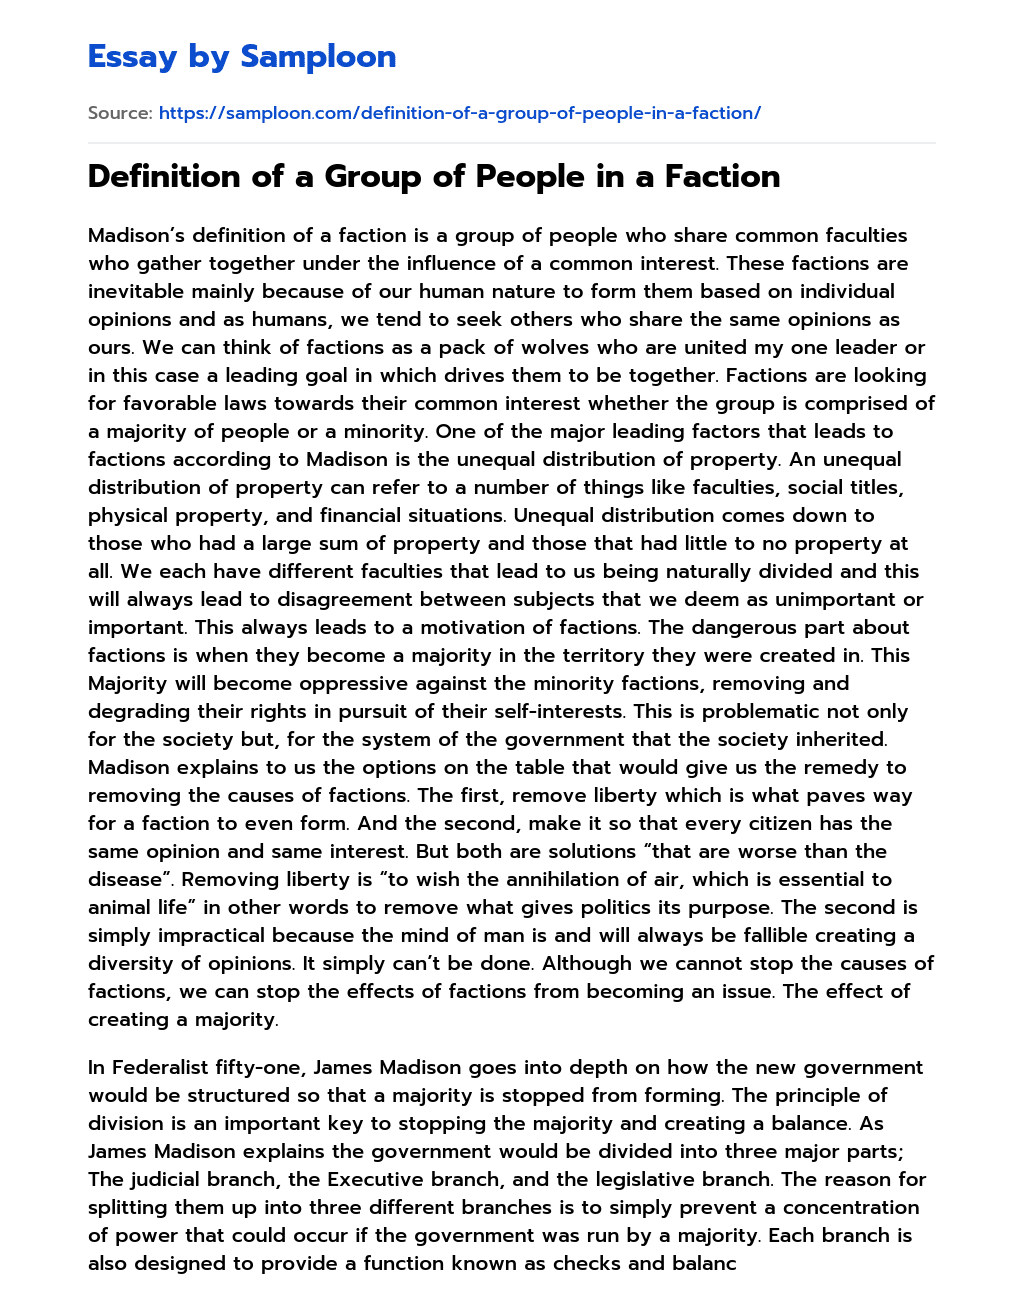 Definition of a Group of People in a Faction Argumentative Essay essay